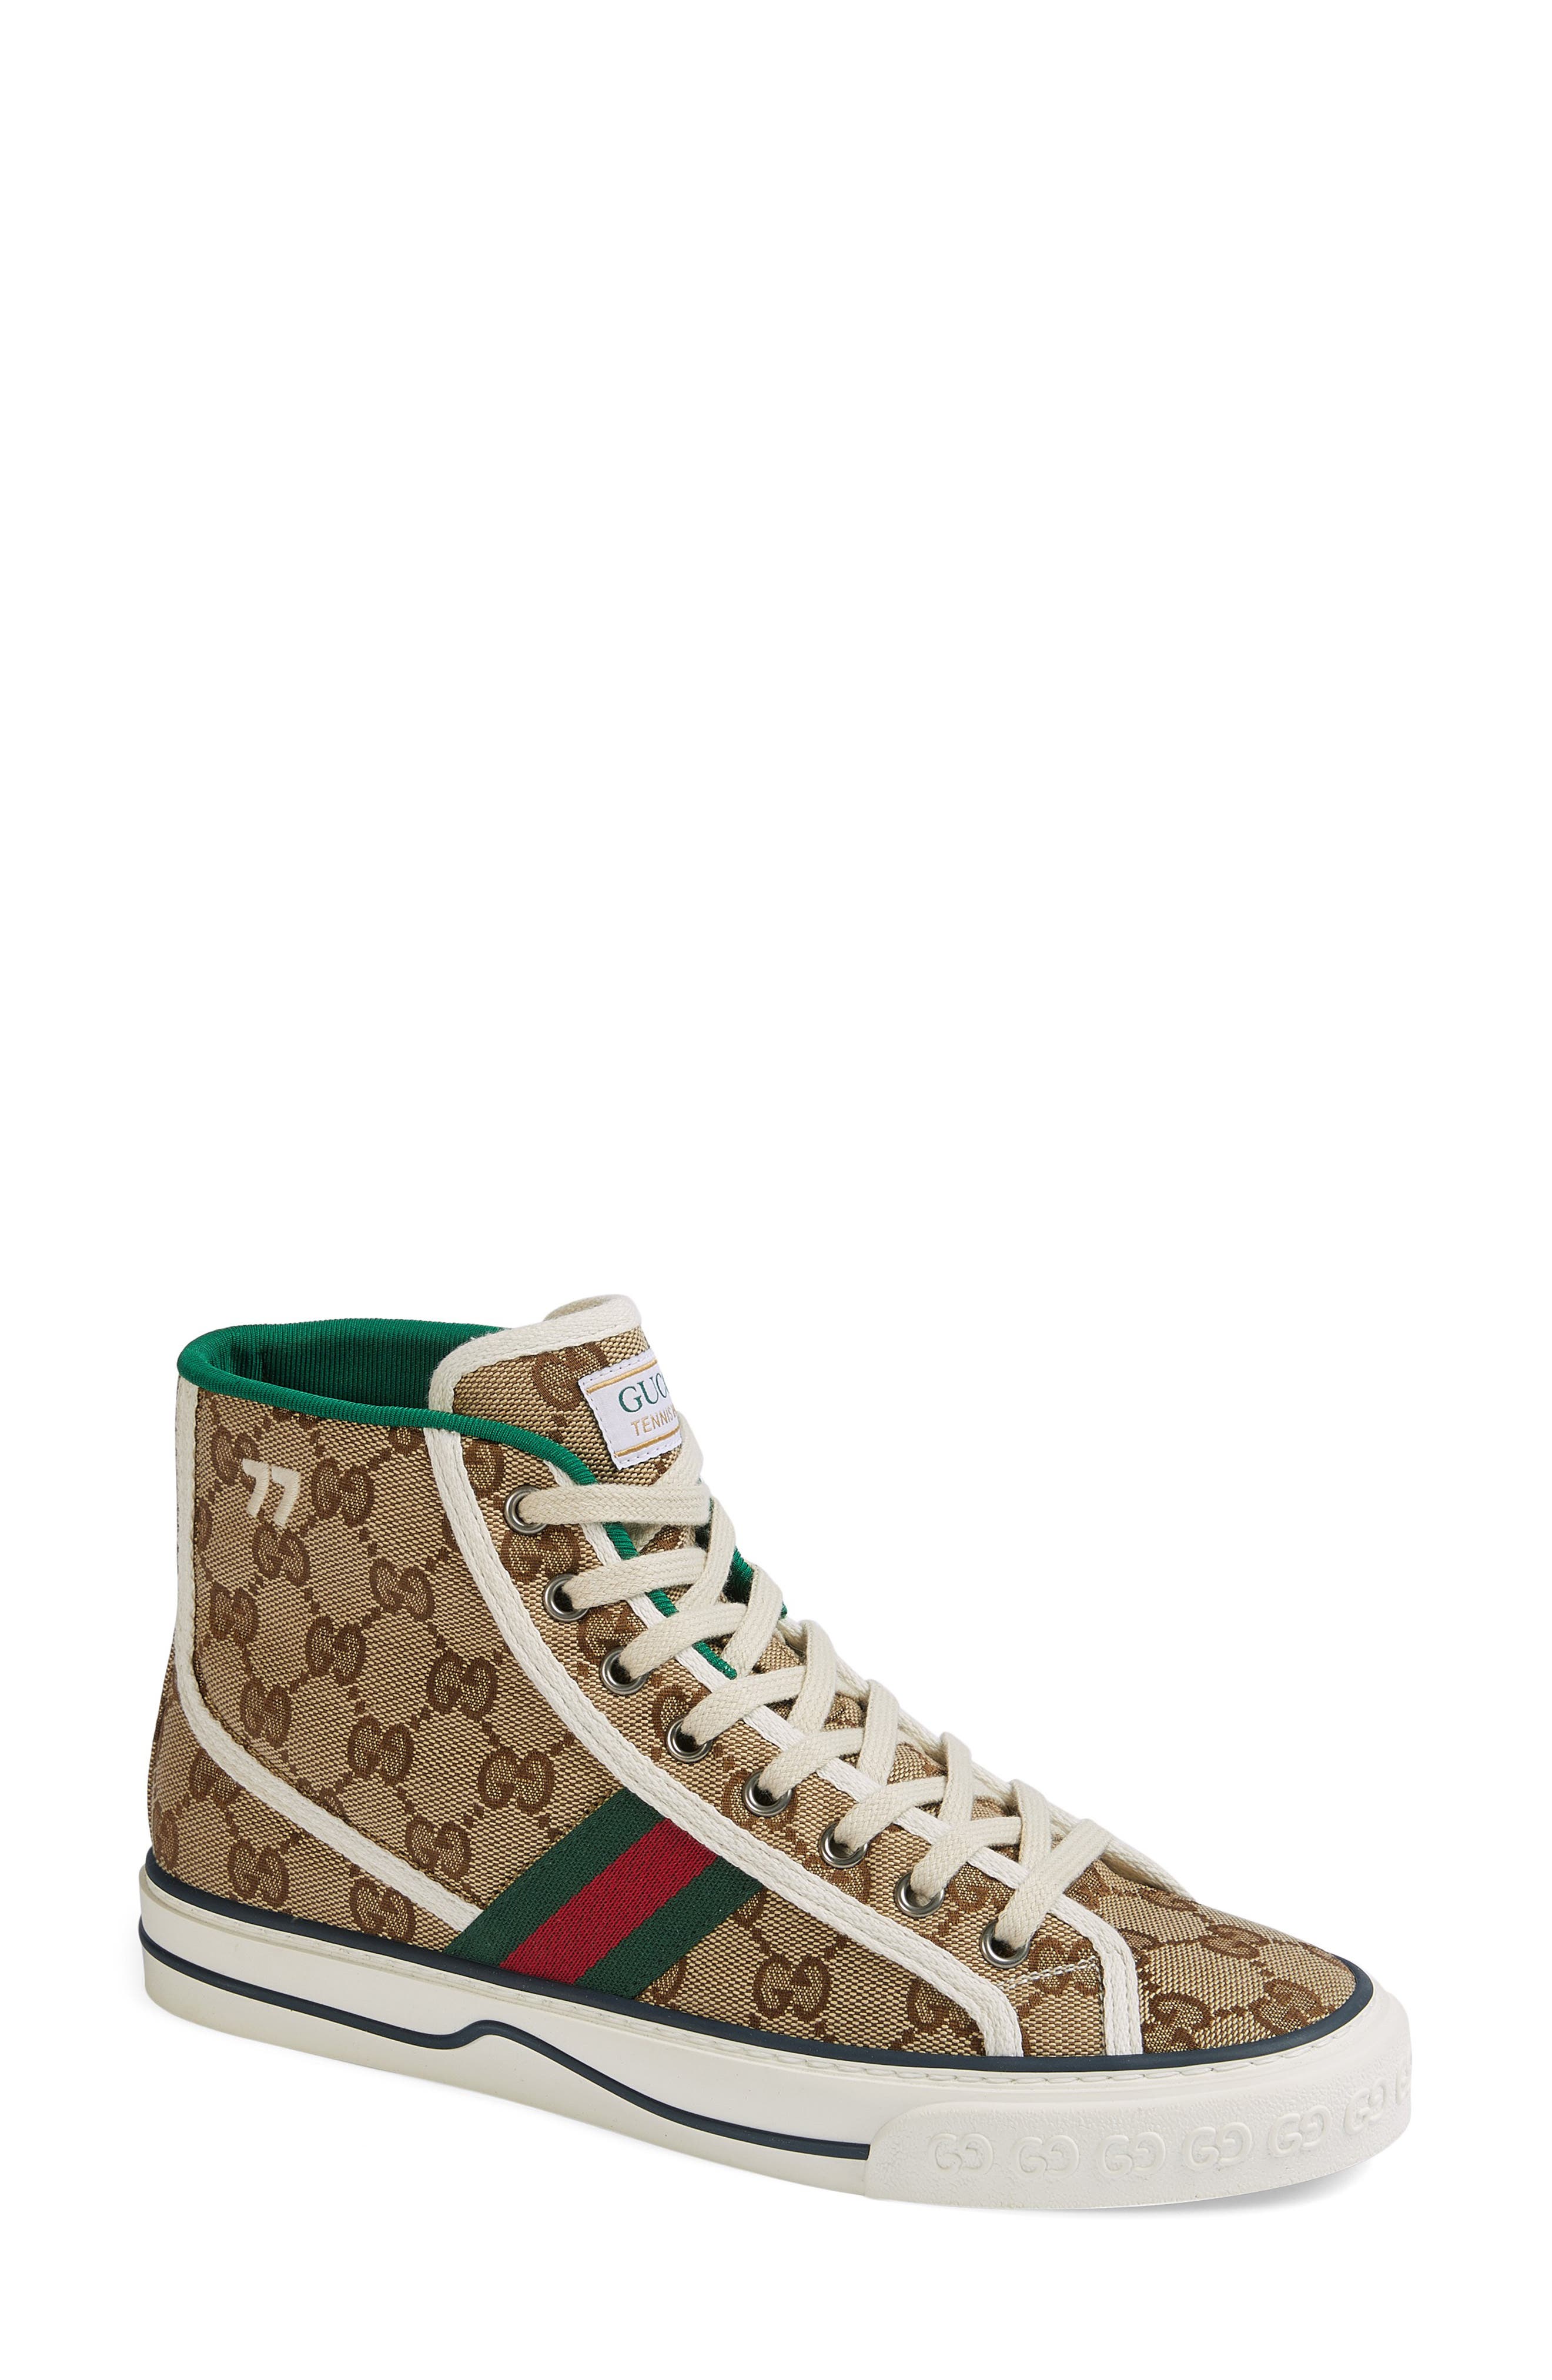 gucci high top shoes sneakers